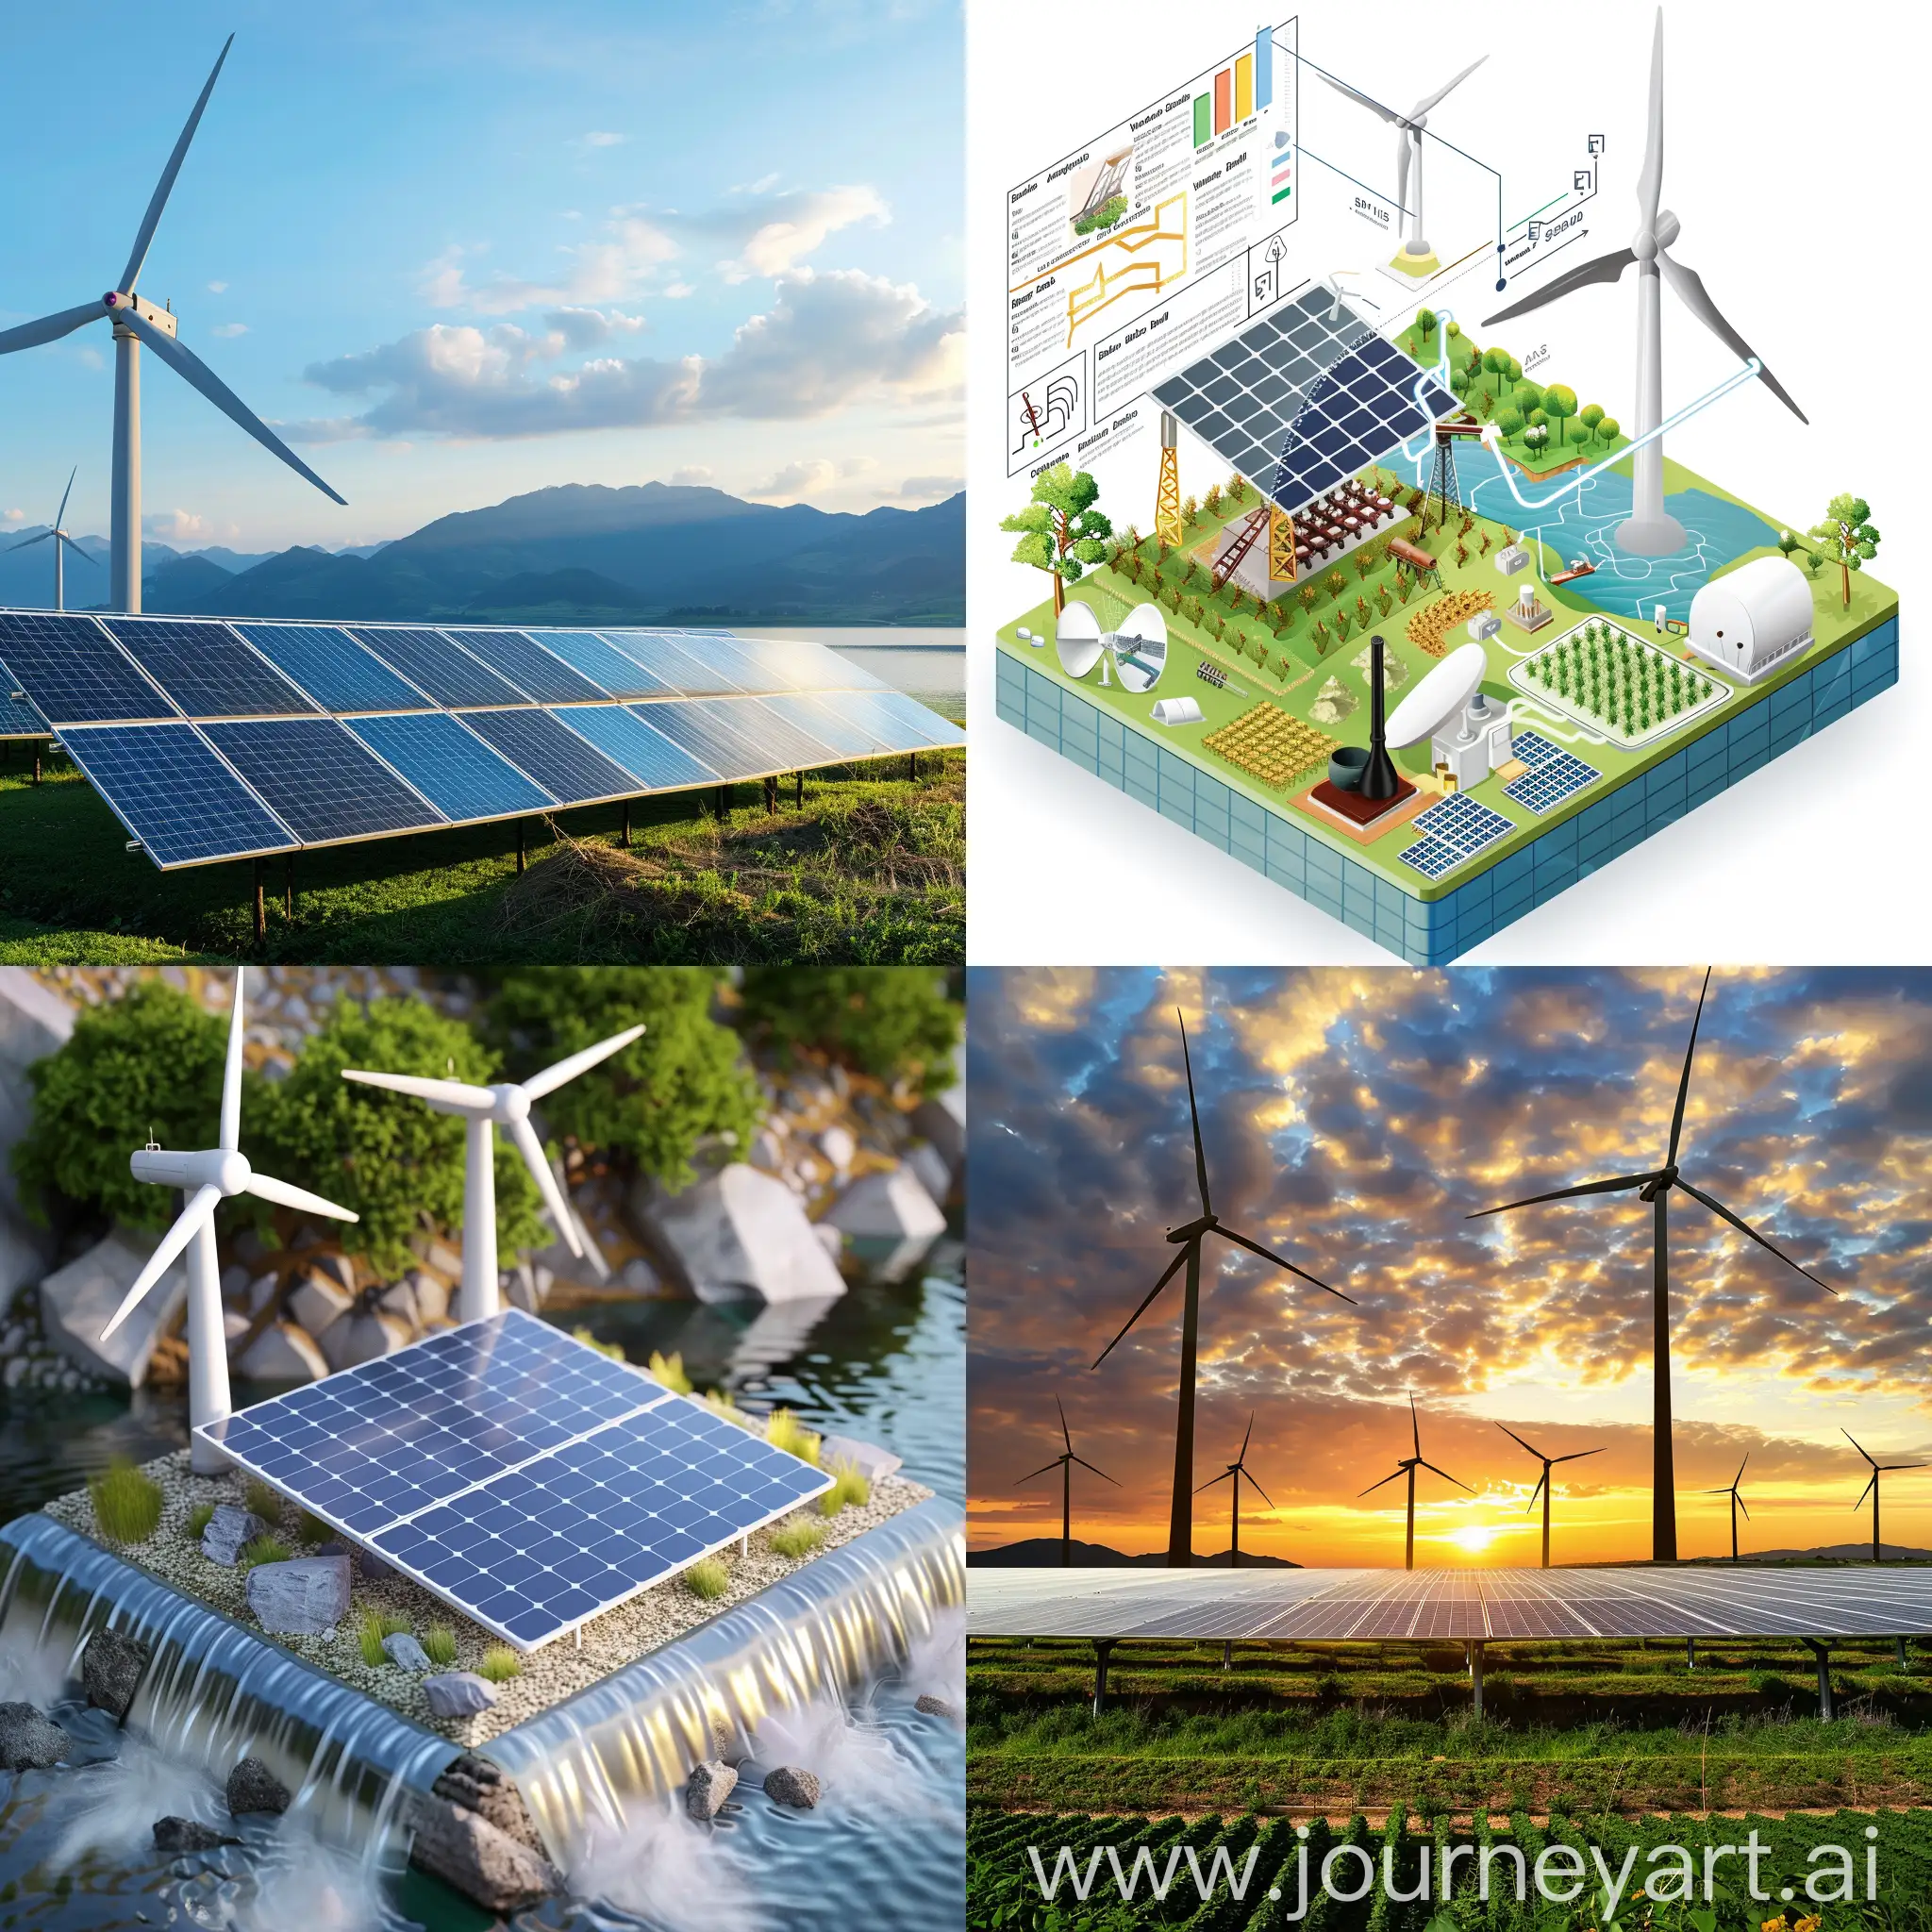 Diverse-Renewable-Energy-Technologies-Solar-Wind-Biomass-and-More